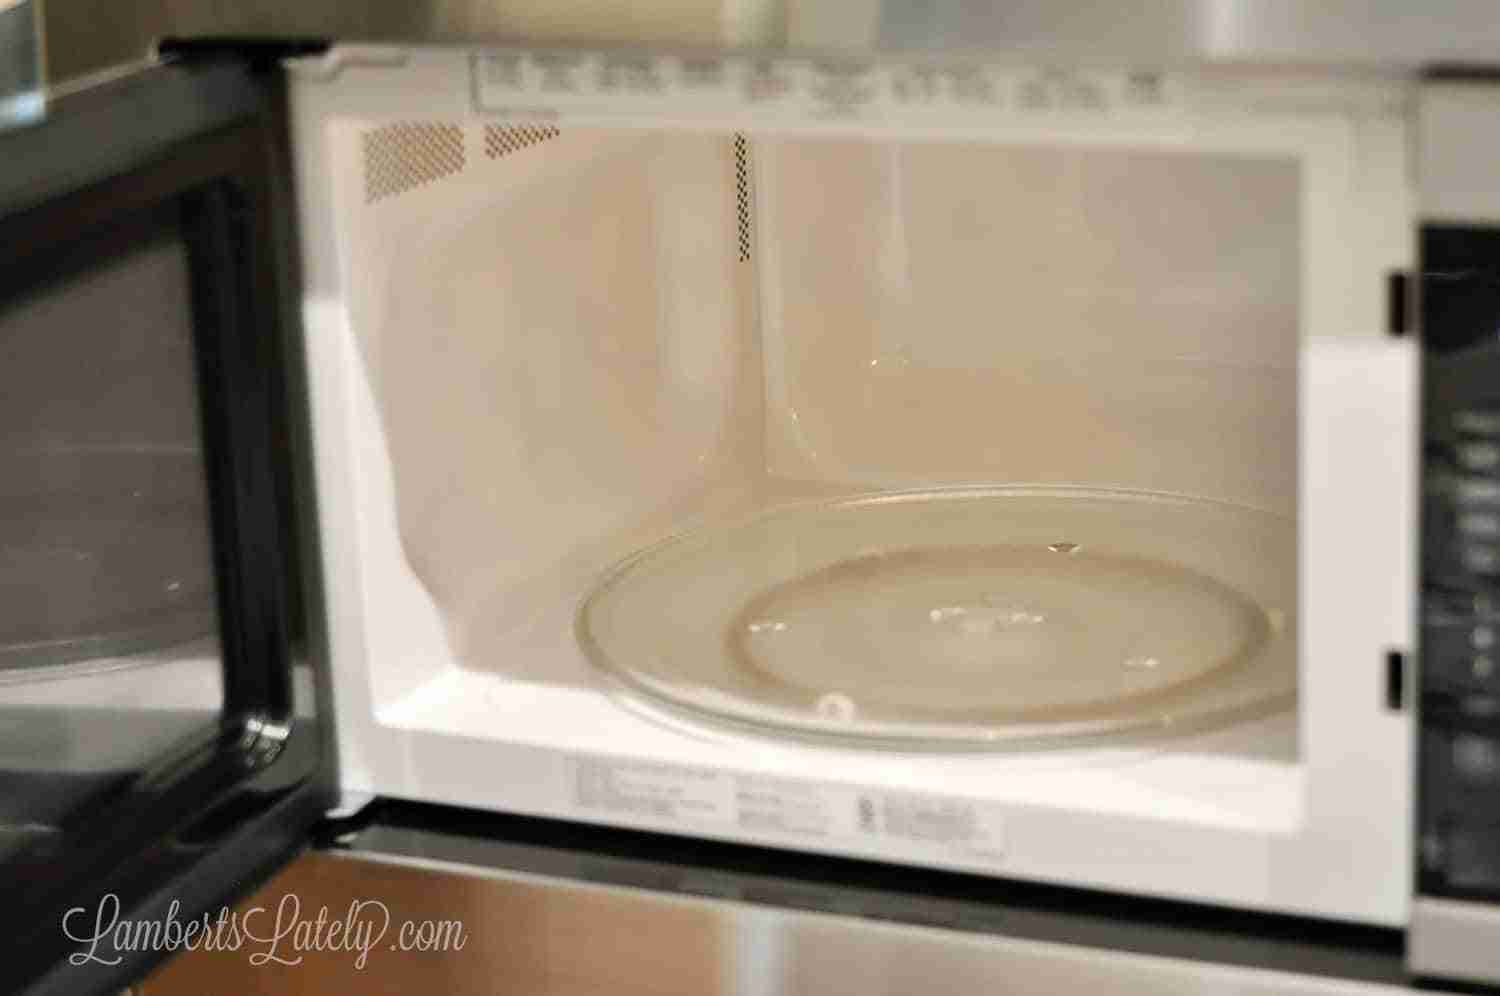 This posts shows how to clean a microwave the easy way - simply use vinegar and water! 